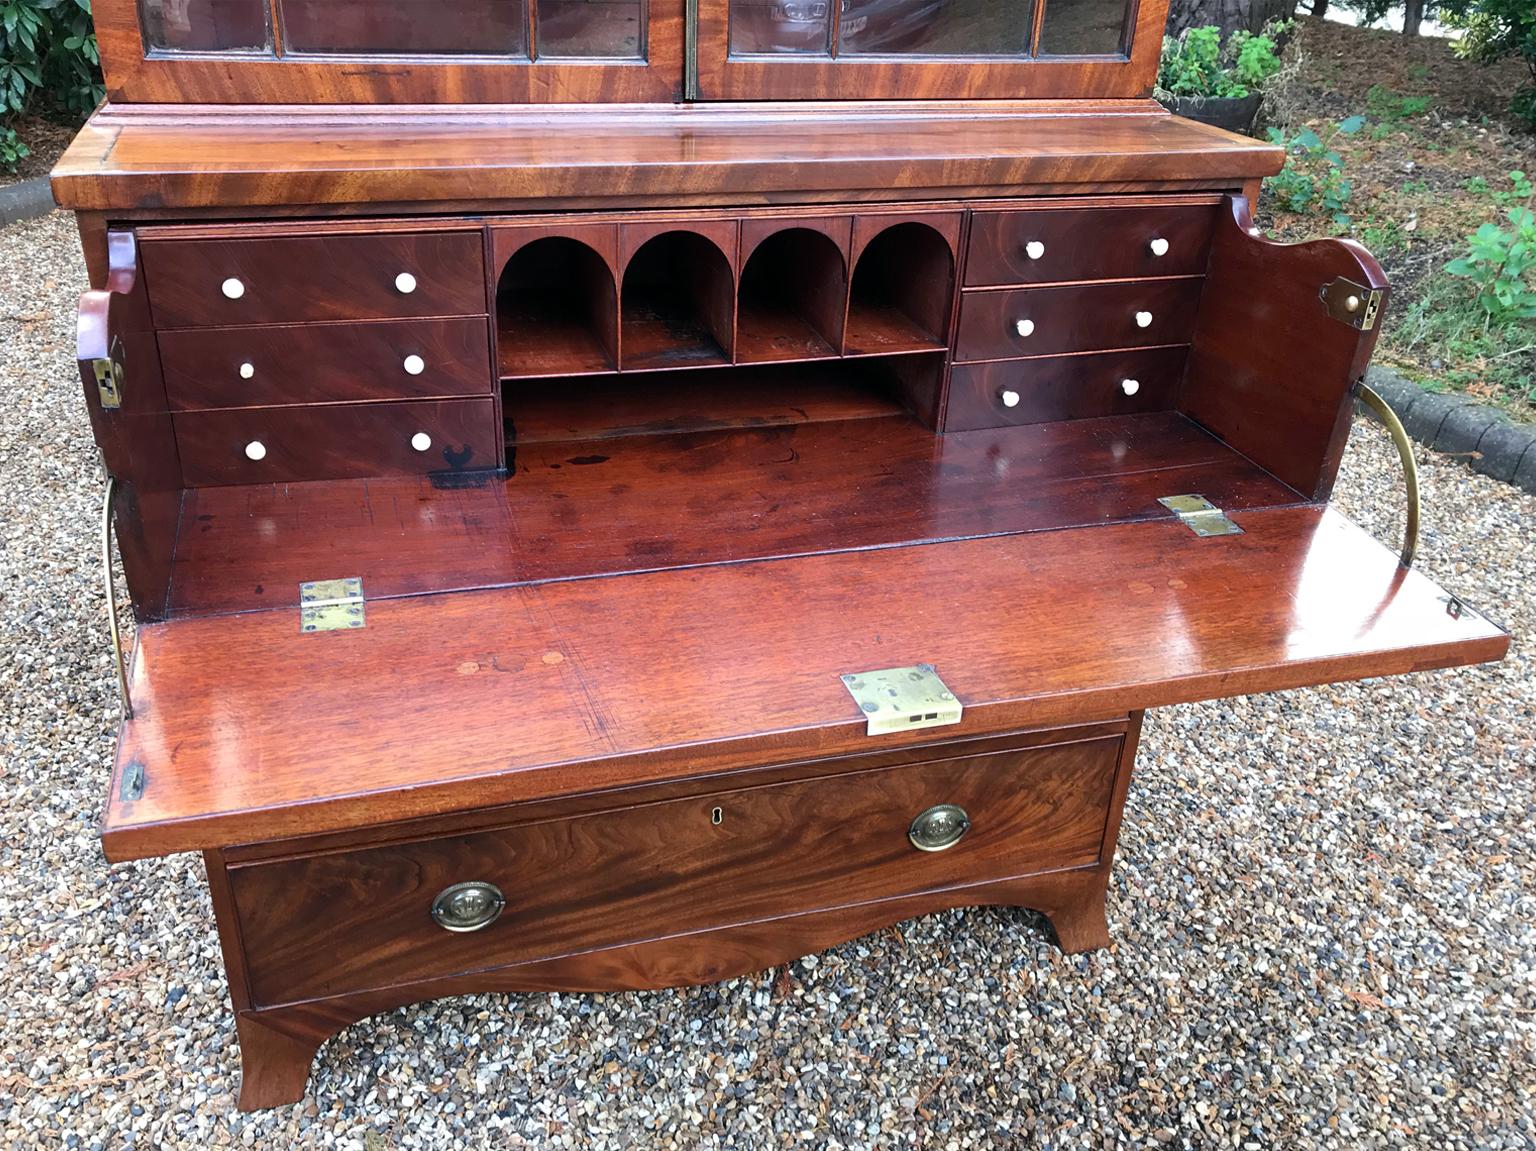 Georgian Mahogany Secrétaire Bookcase or Chest In Excellent Condition In Richmond, London, Surrey